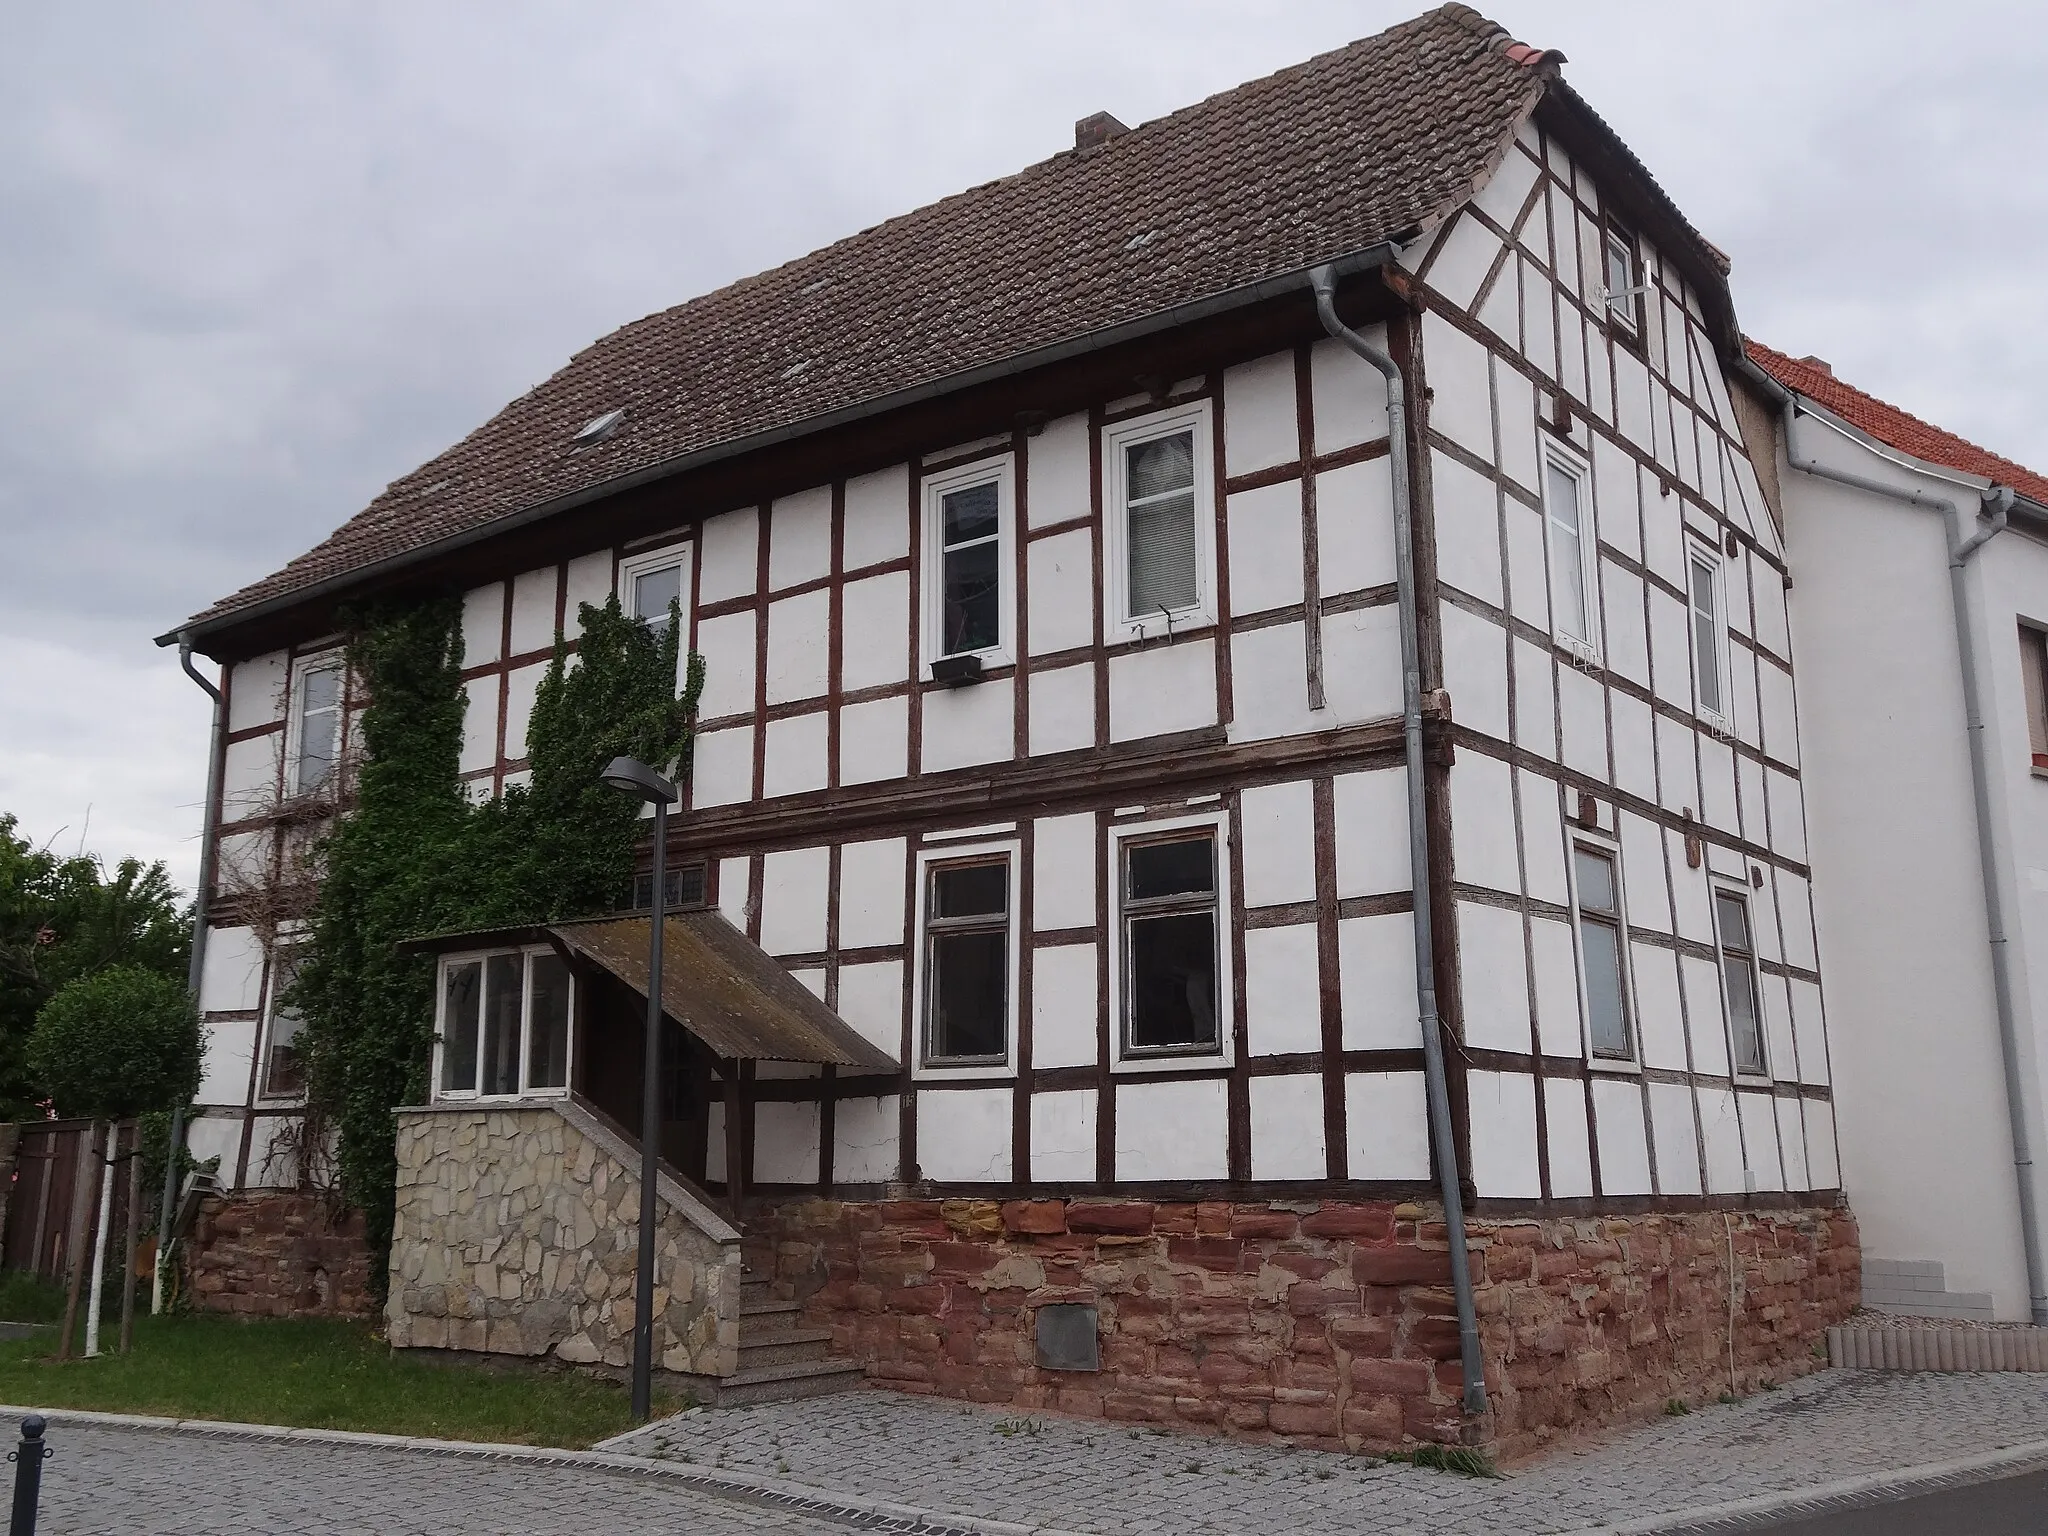 Photo showing: Timber-framed house in Seehausen, Bad Frankenhausen, Thuringia, Germany